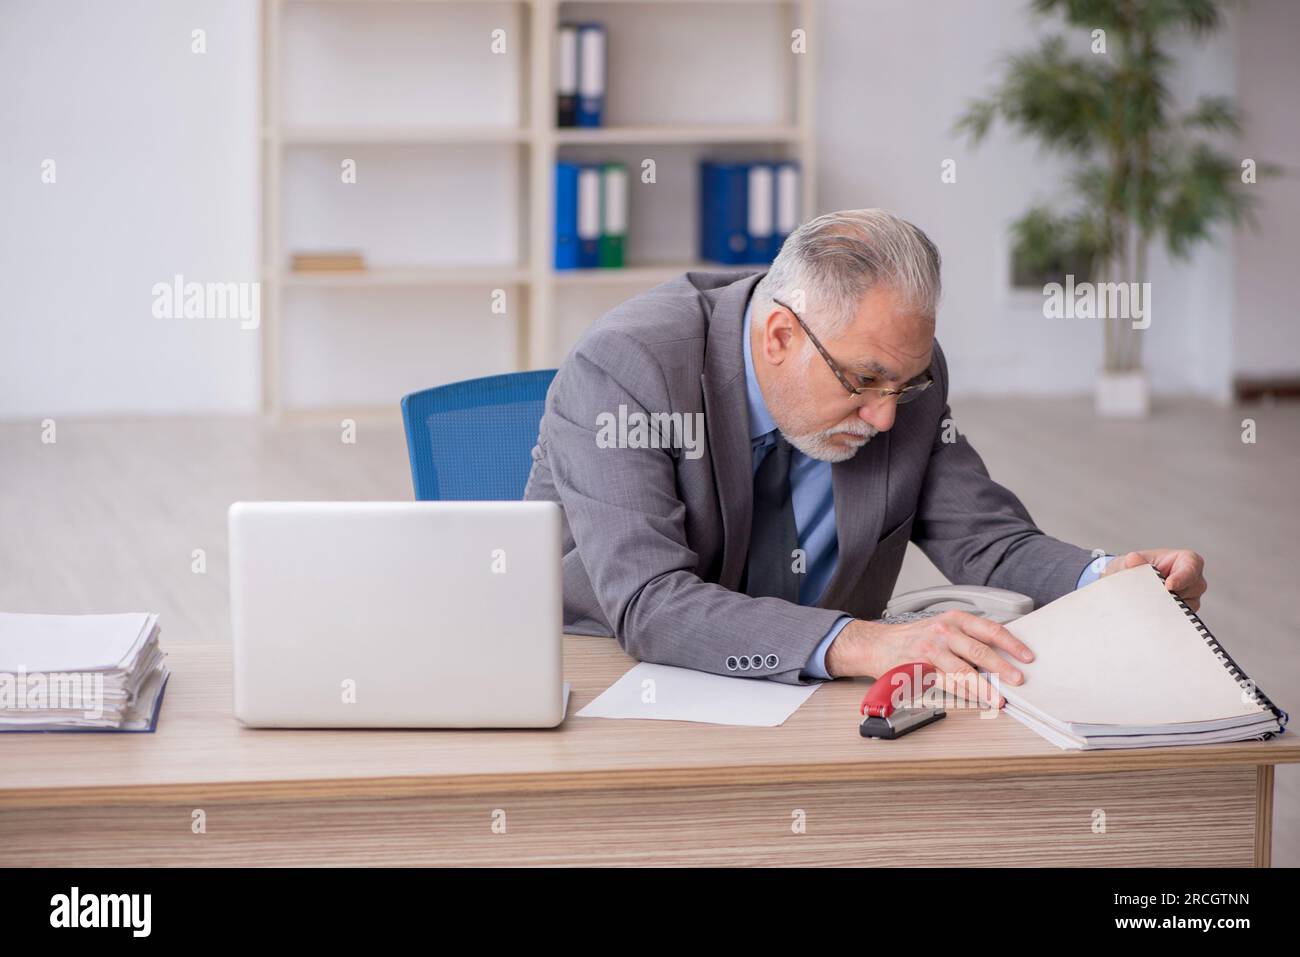 Old employee sitting at workplace Stock Photo